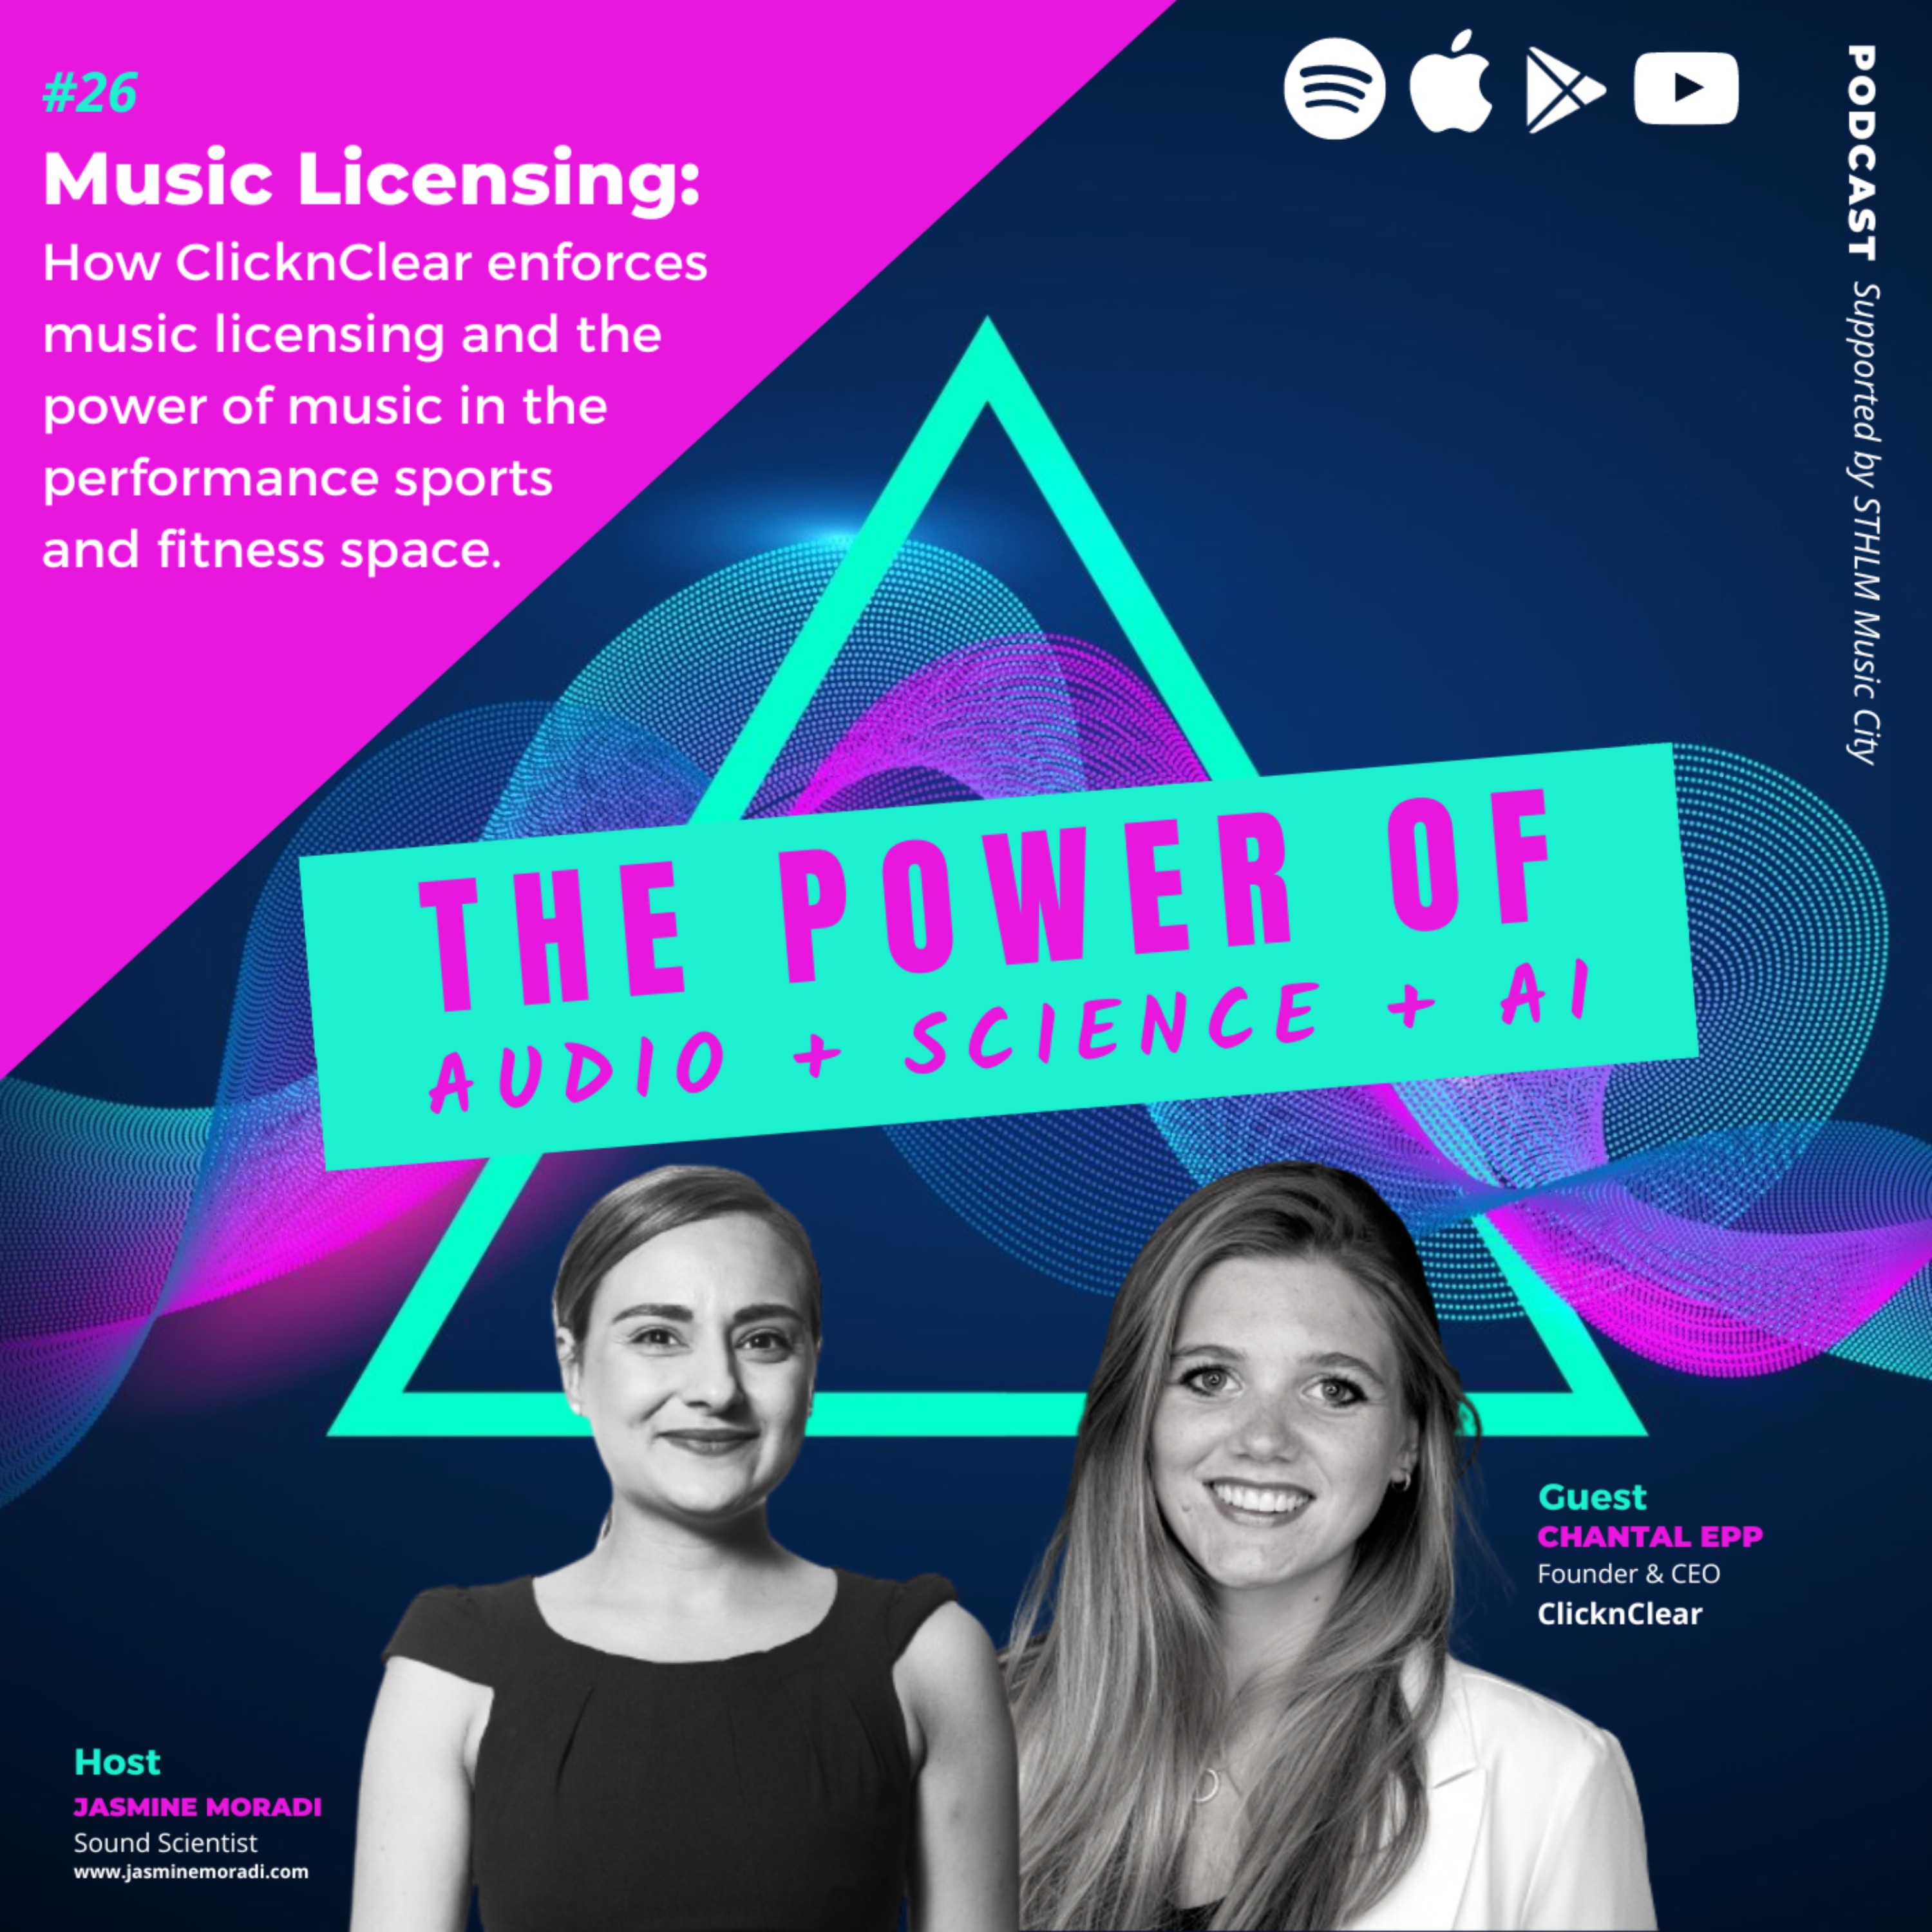 cover art for 26. Music Licensing: How ClicknClear enforces music licensing and the power of music in the performance sports and fitness space. | Chantal Epp, Founder & CEO ClicknClear